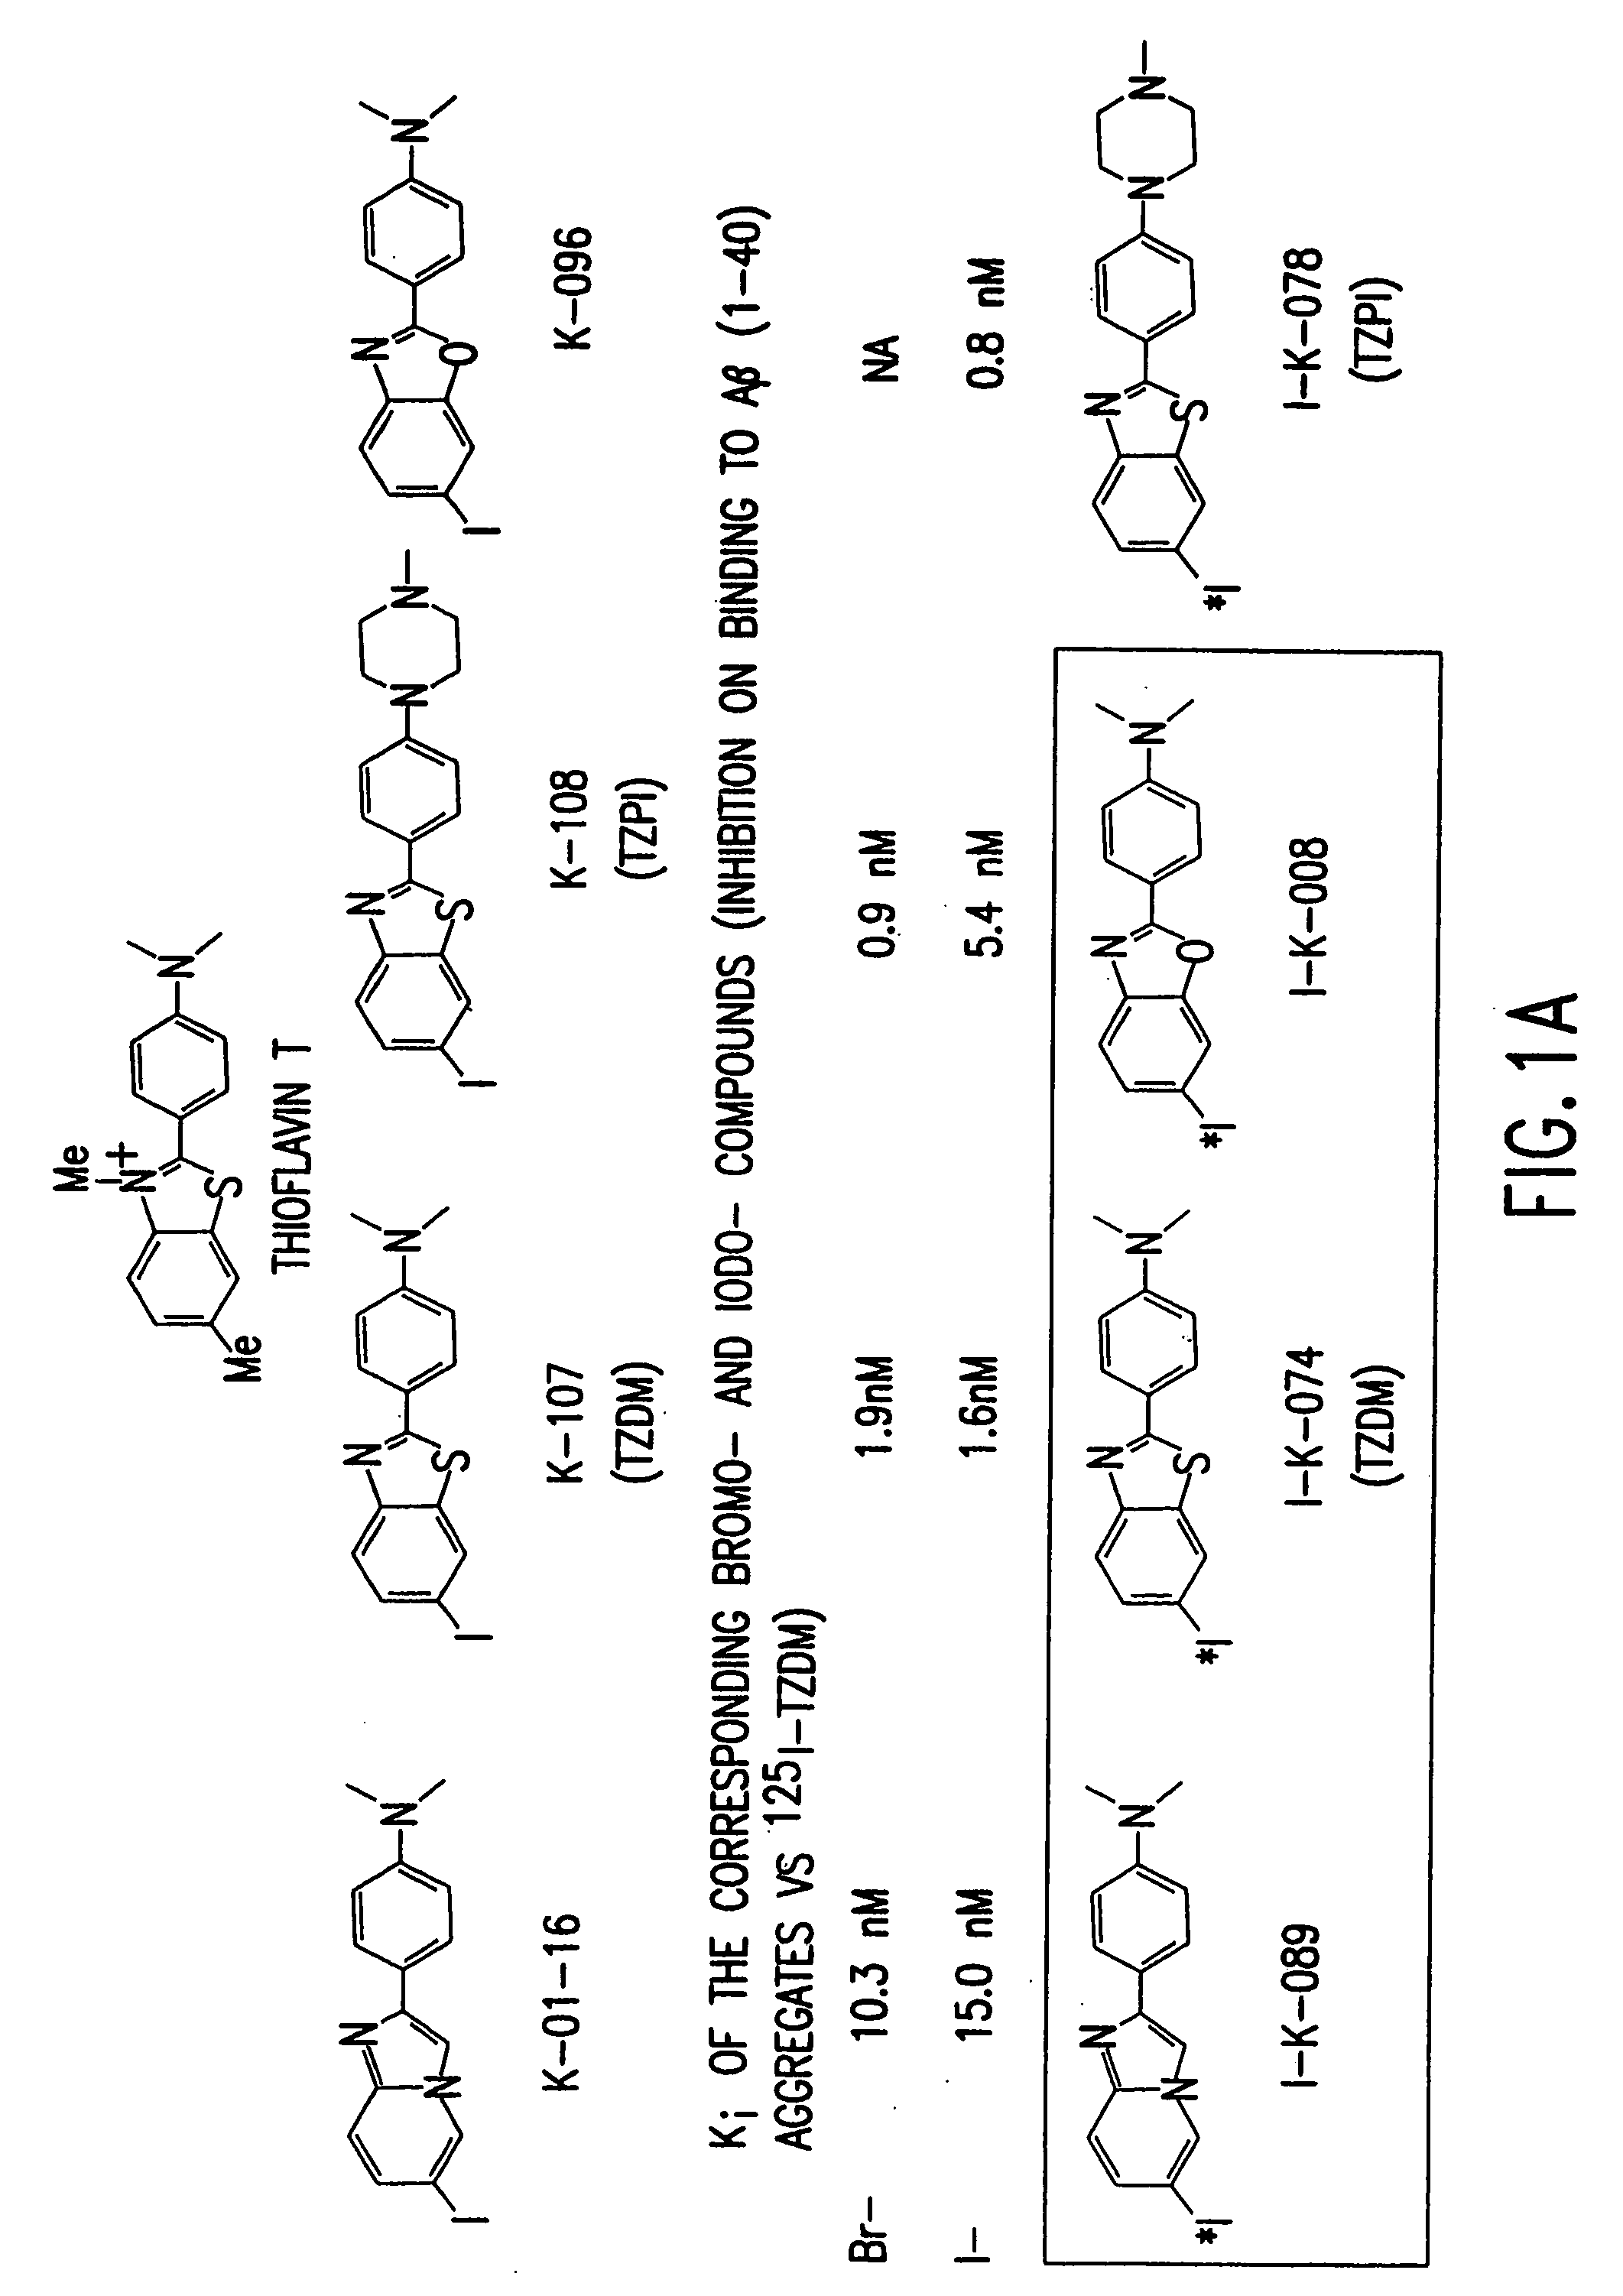 Amyloid plaque aggregation inhibitors and diagnostic imaging agents